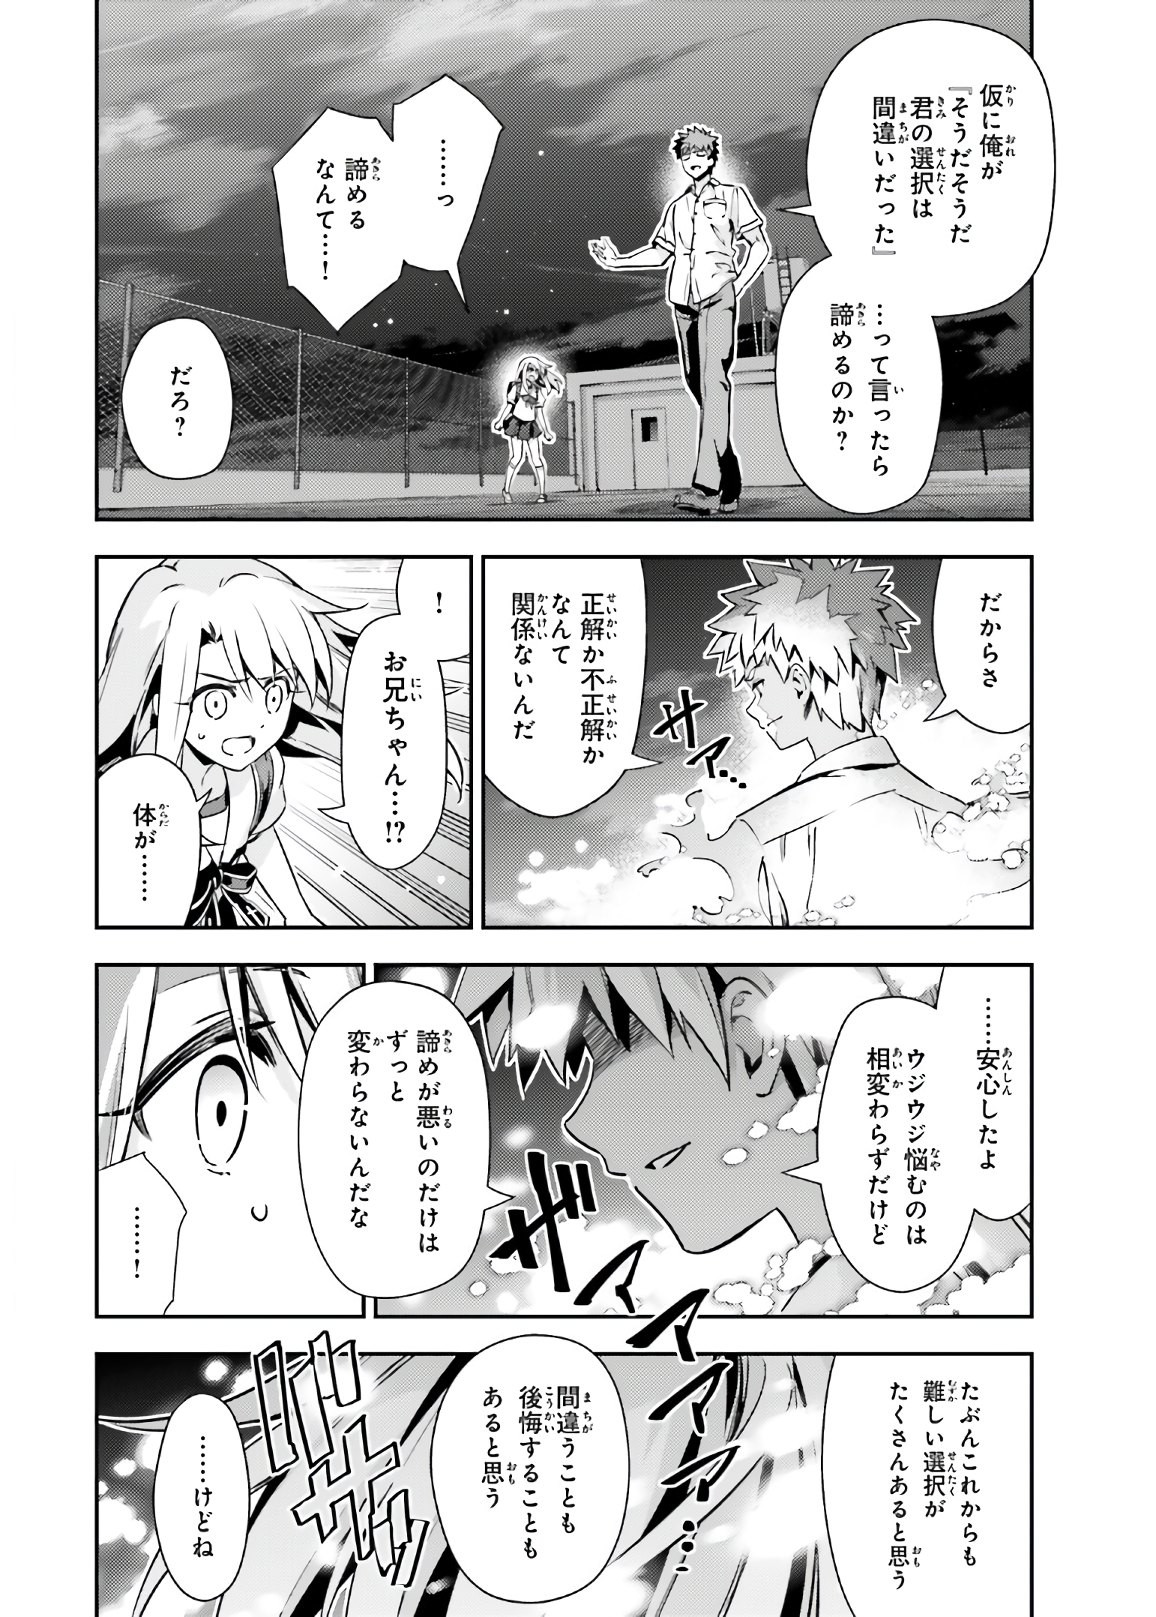 Fate/Kaleid Liner Prisma Illya Drei! - Chapter 61 - Page 20